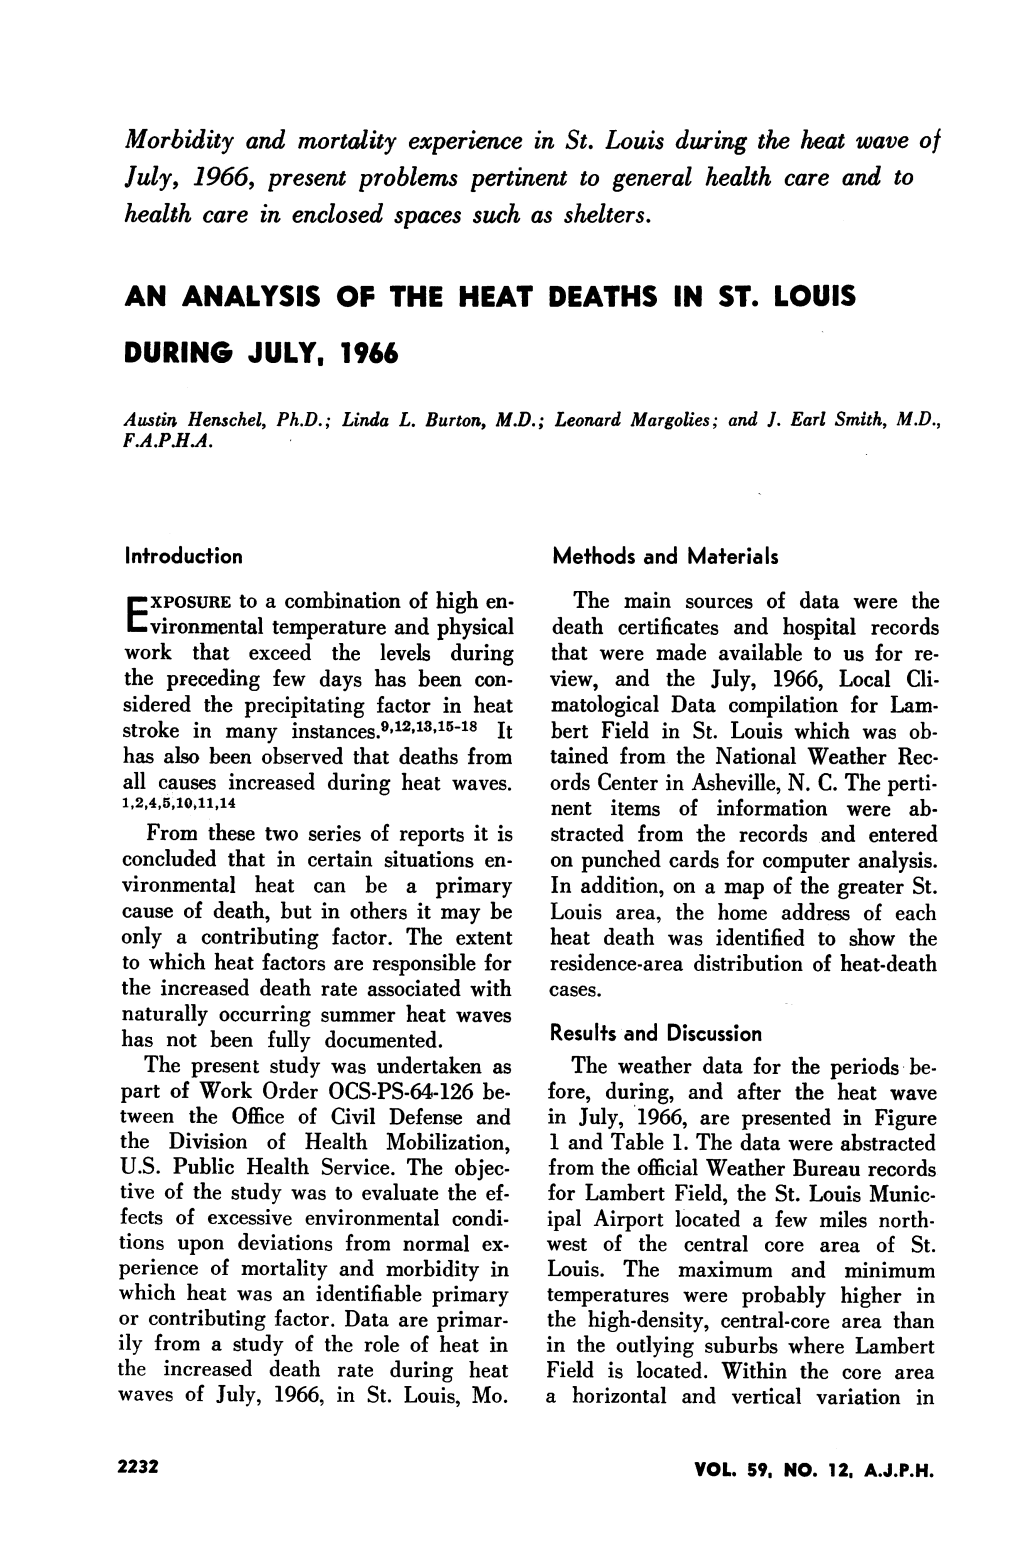 An Analysis of the Heat Deaths in St. Louis During July, 1966